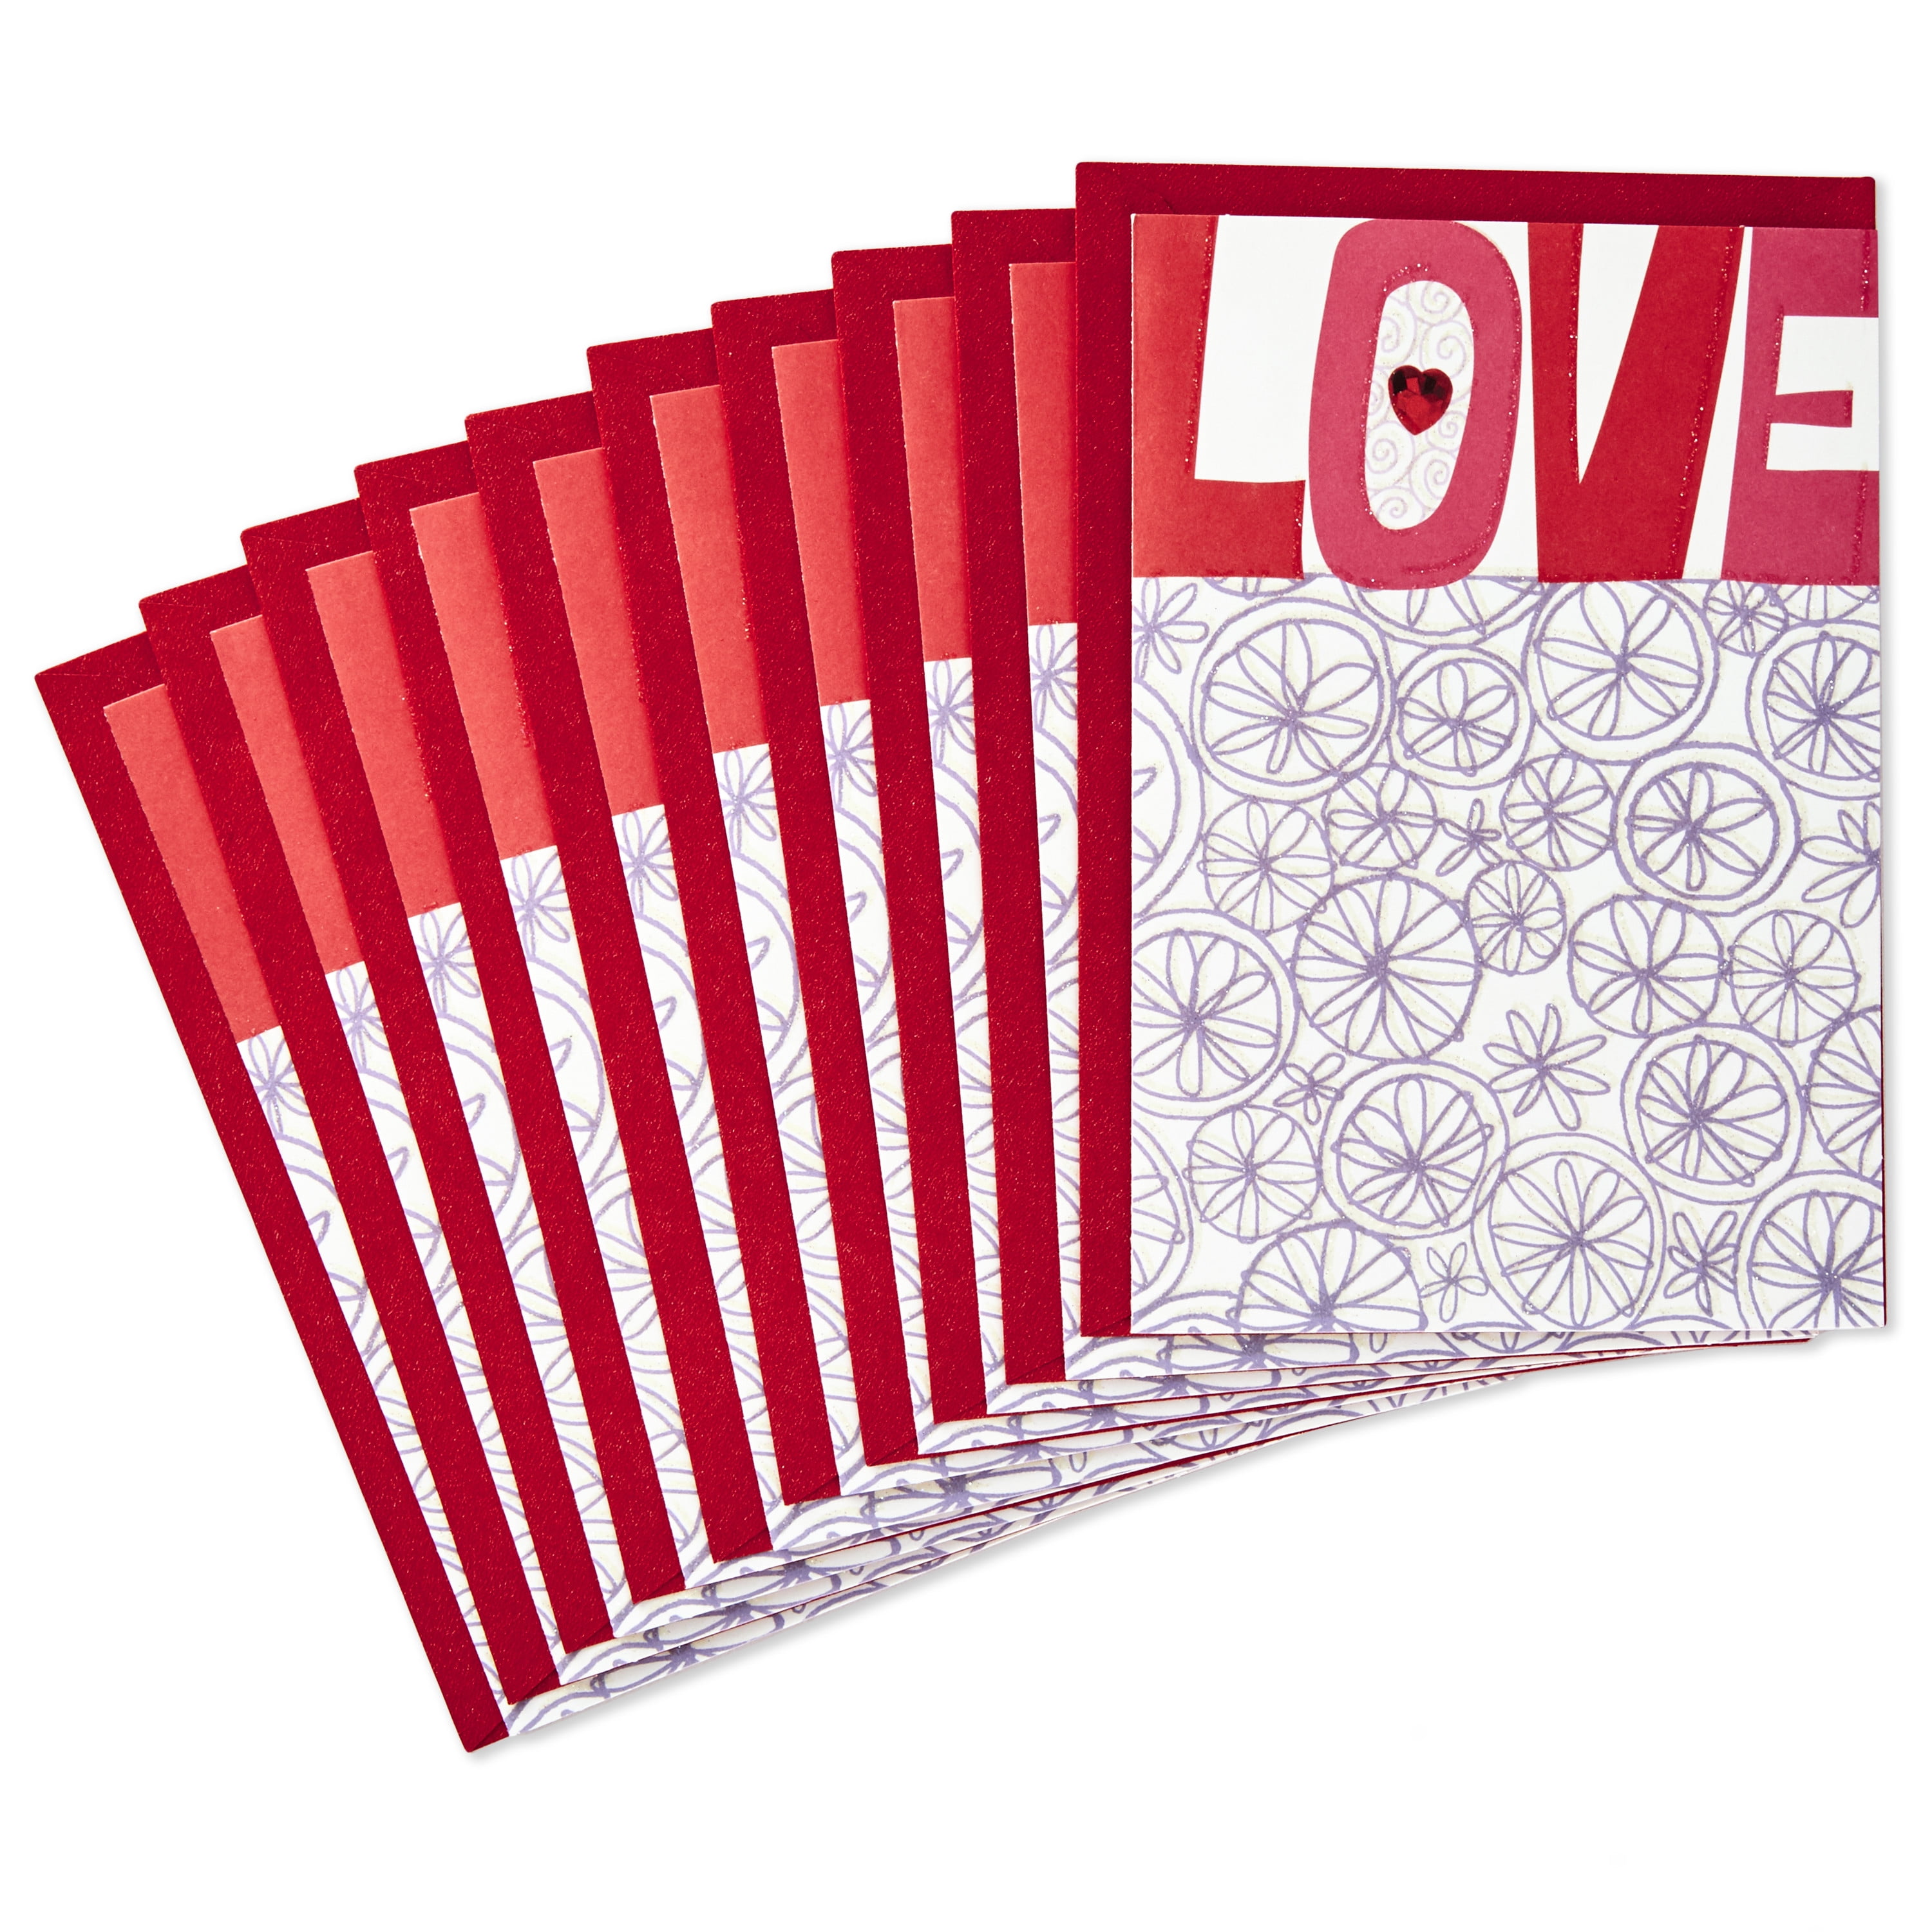 New For Wife Hallmark Valentine's Day Card with envelope 